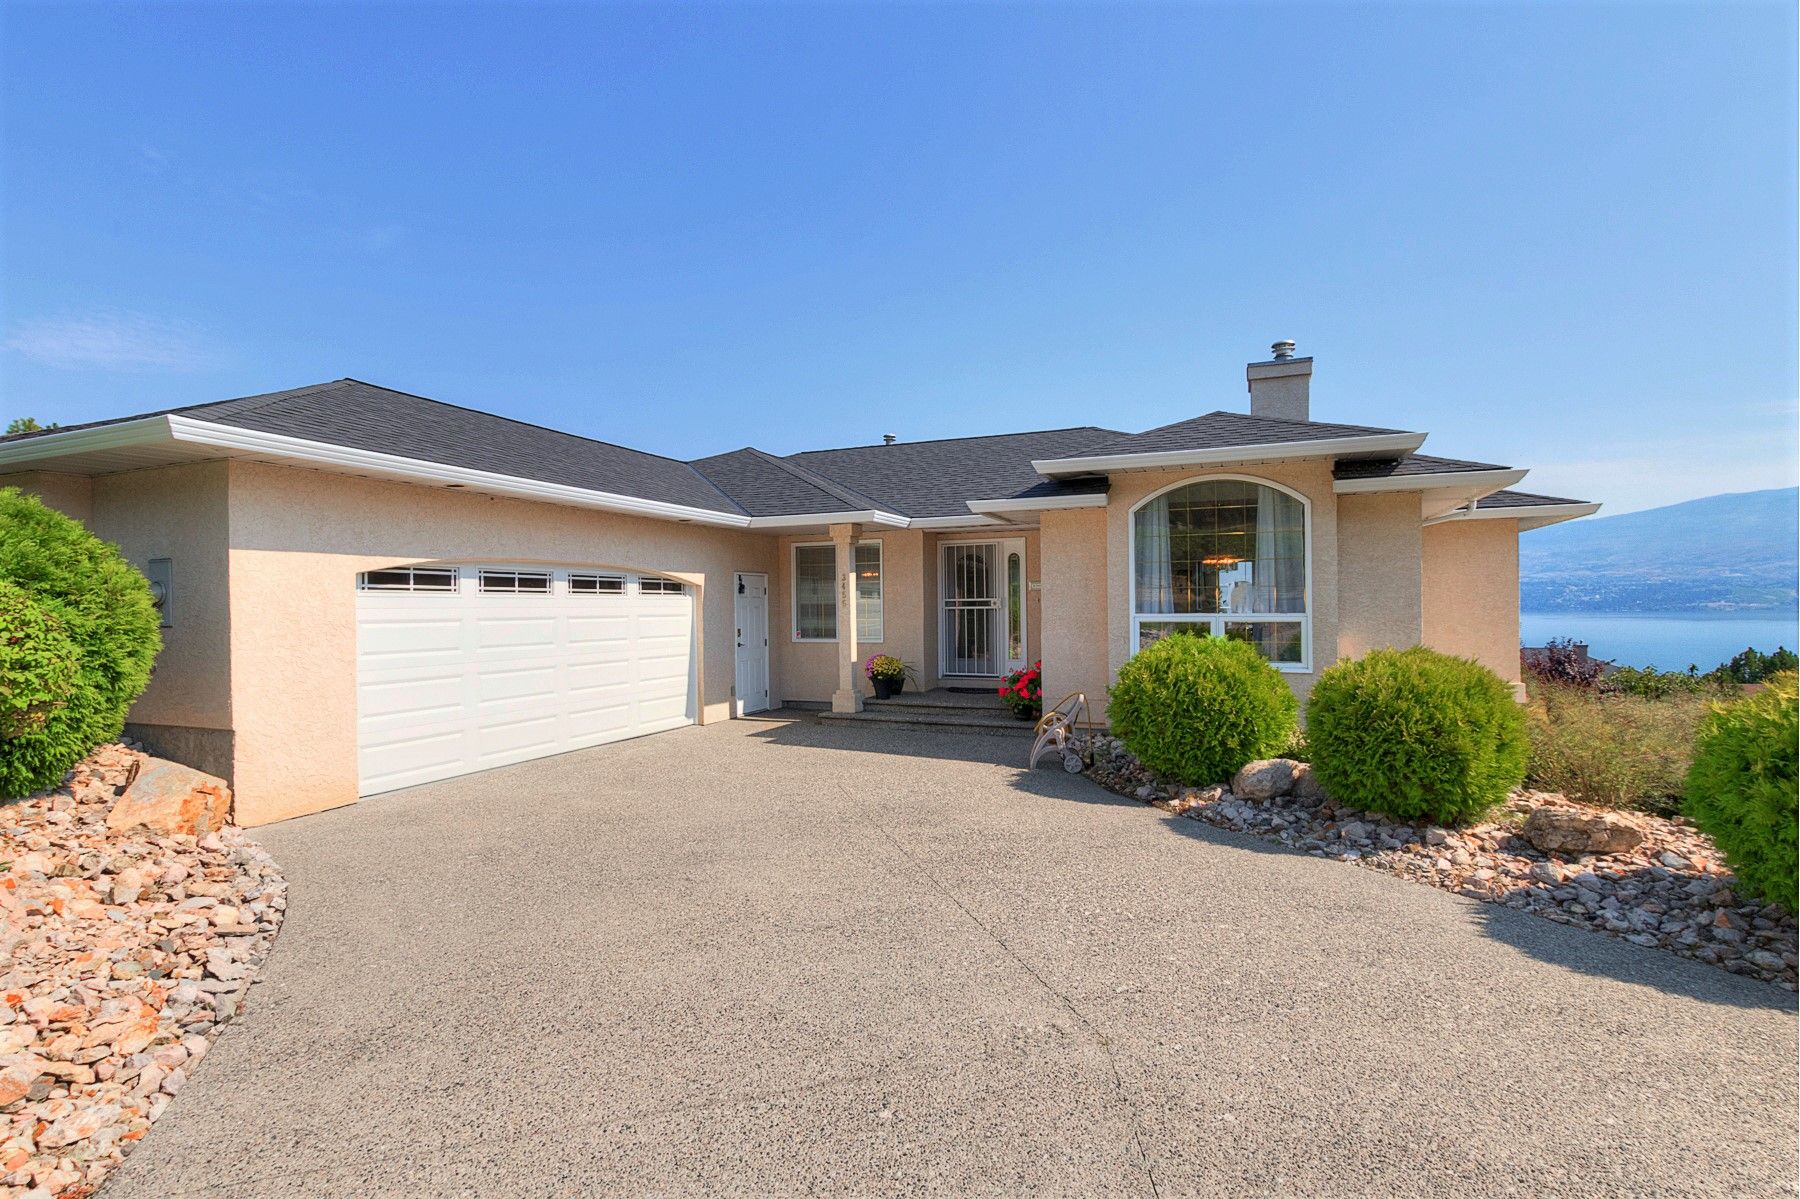 Main Photo: 3455 Apple Way Boulevard in West Kelowna: Lakeview Heights House for sale (Central Okanagan)  : MLS®# 10167974